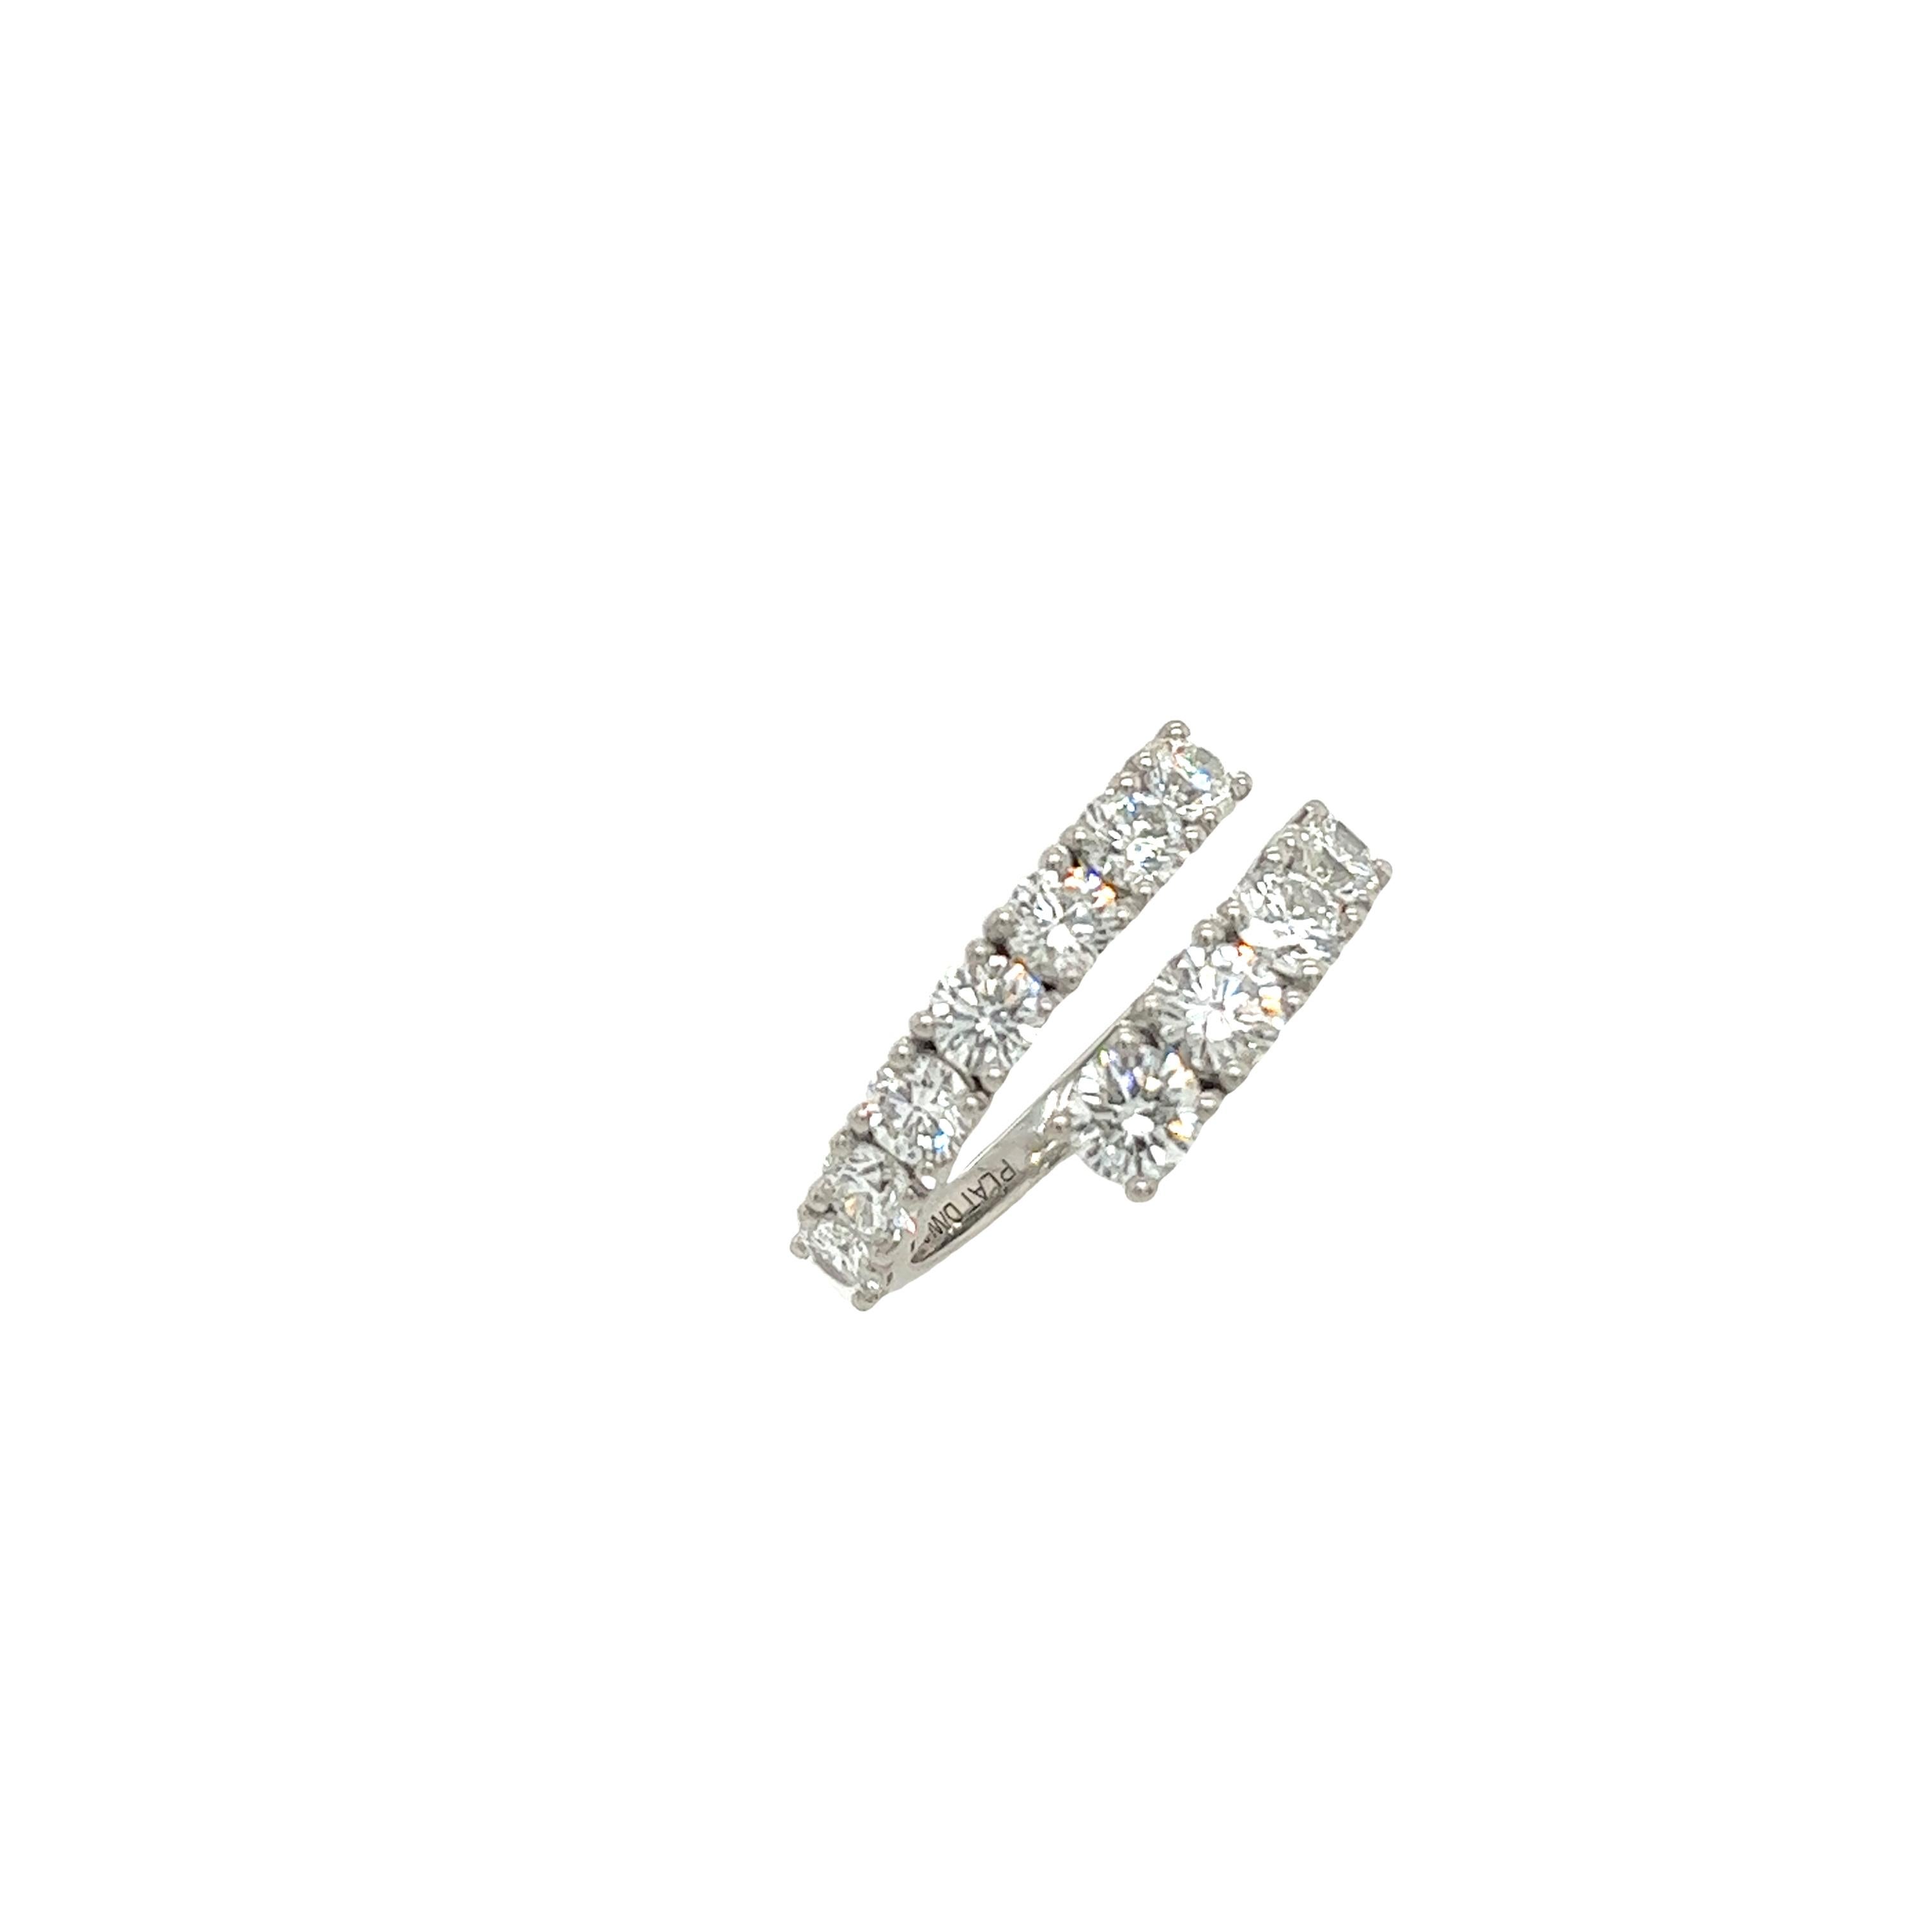 Diamond Coil Dress Ring, Set With 2.80ct G/VS1 Round Diamonds Set In Platinum For Sale 2